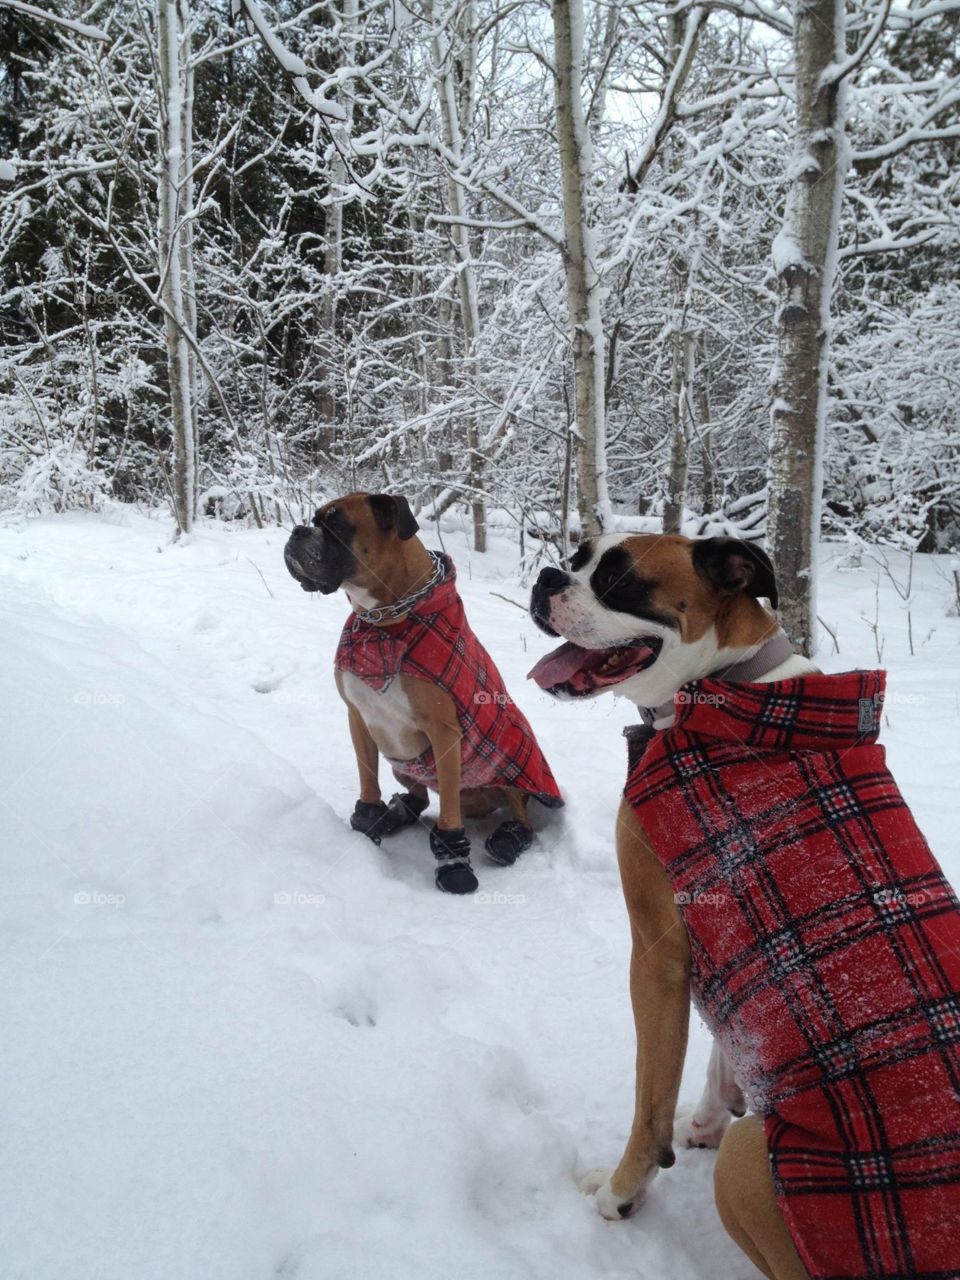 Boxers in matching winter wear 